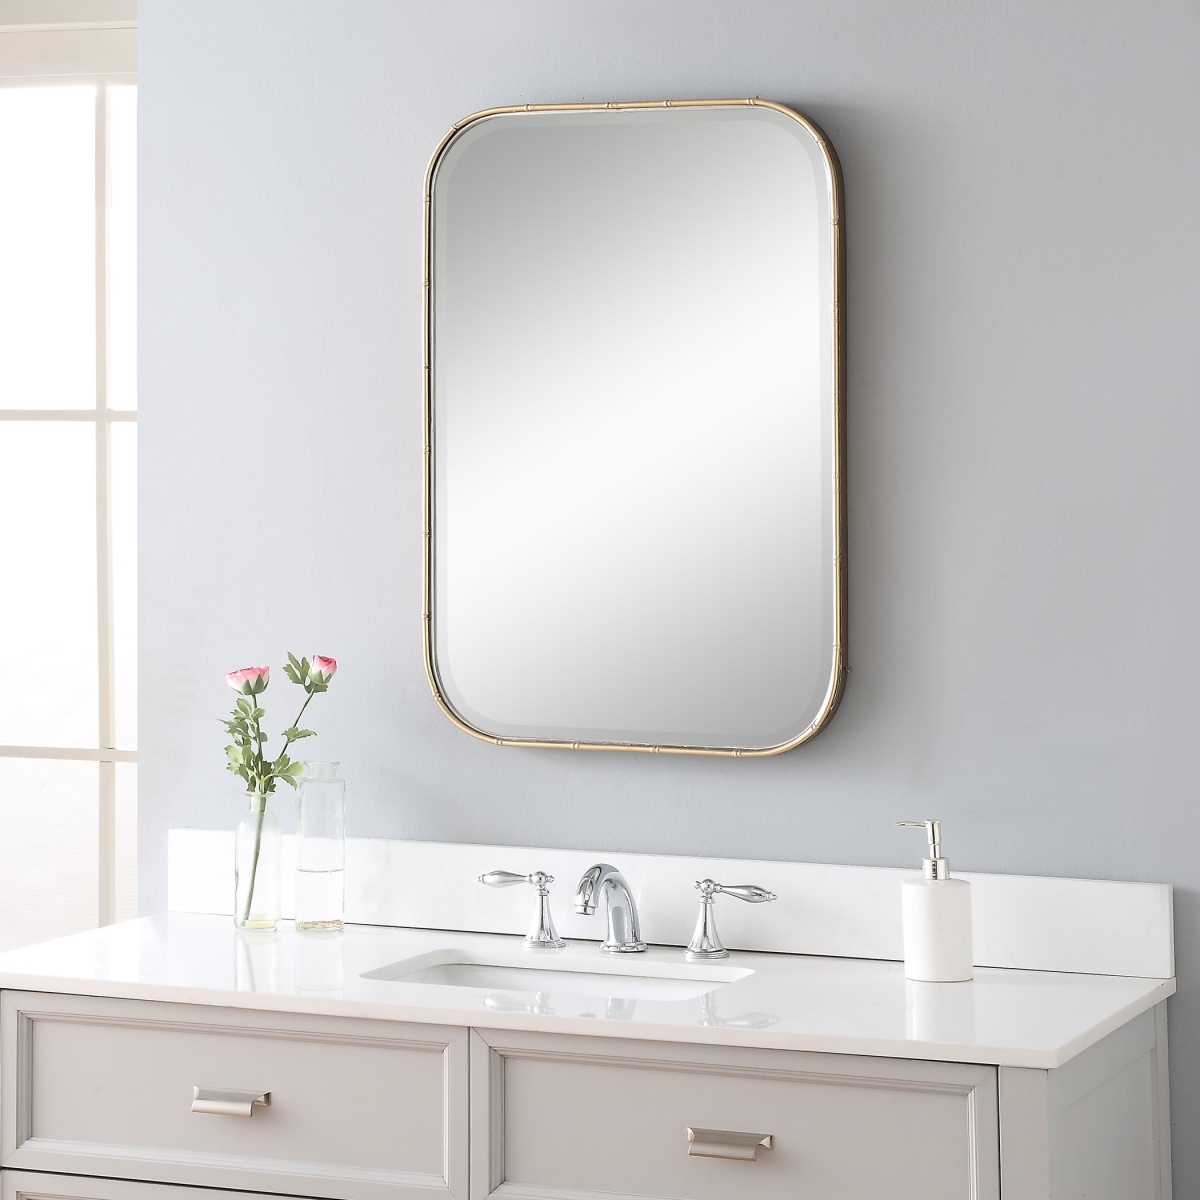 Picture of 212 Main 09599 34.5 x 4 x 31 in. Malay Vanity Mirror